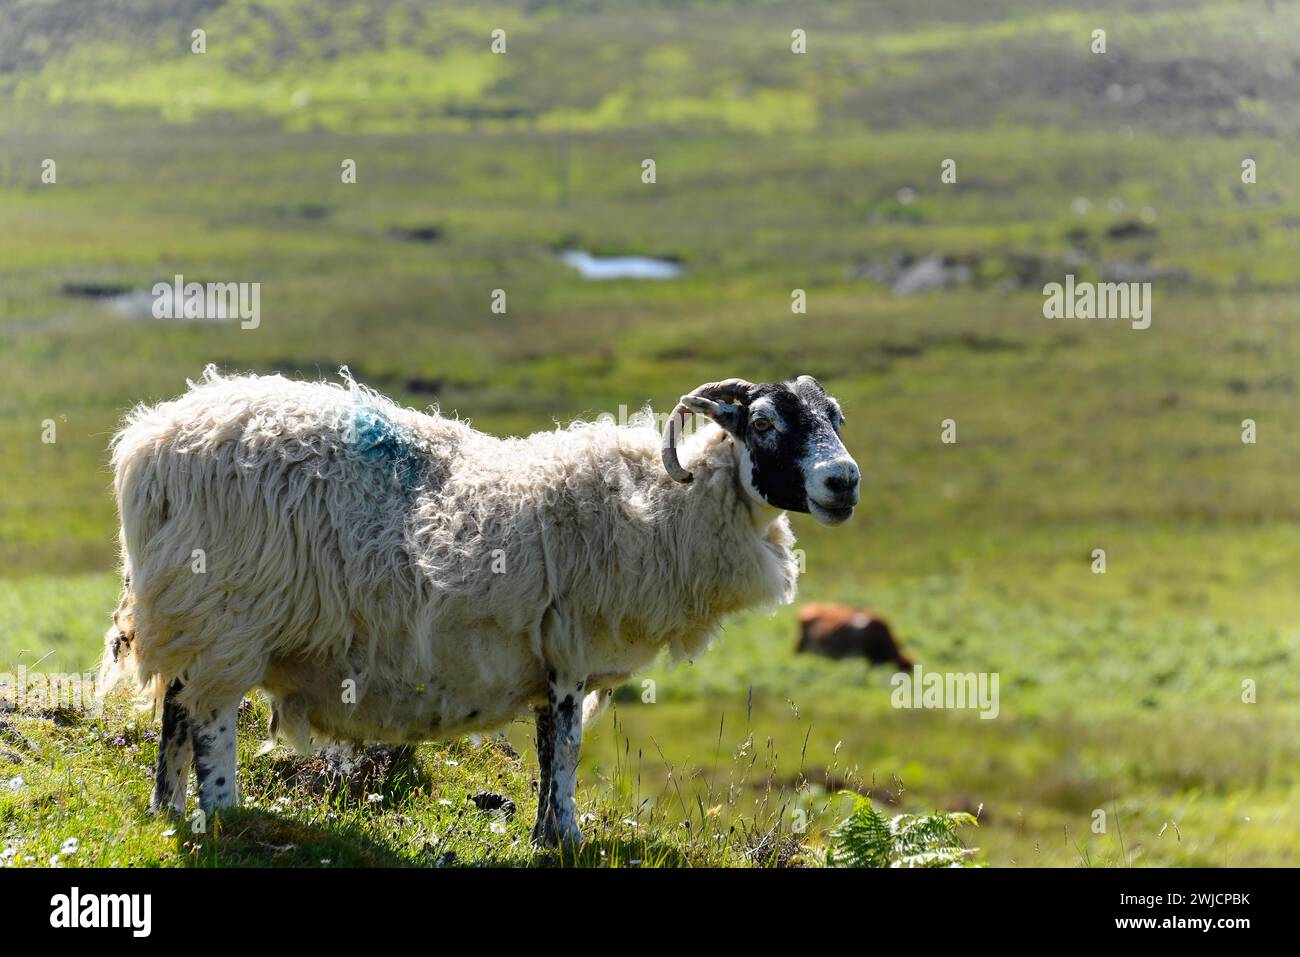 Ram domestic sheep (Ovis aries), The Quiraing, Isle of Skye, Inner Hebrides, Highlands and Islands, Scotland, Great Britain Stock Photo